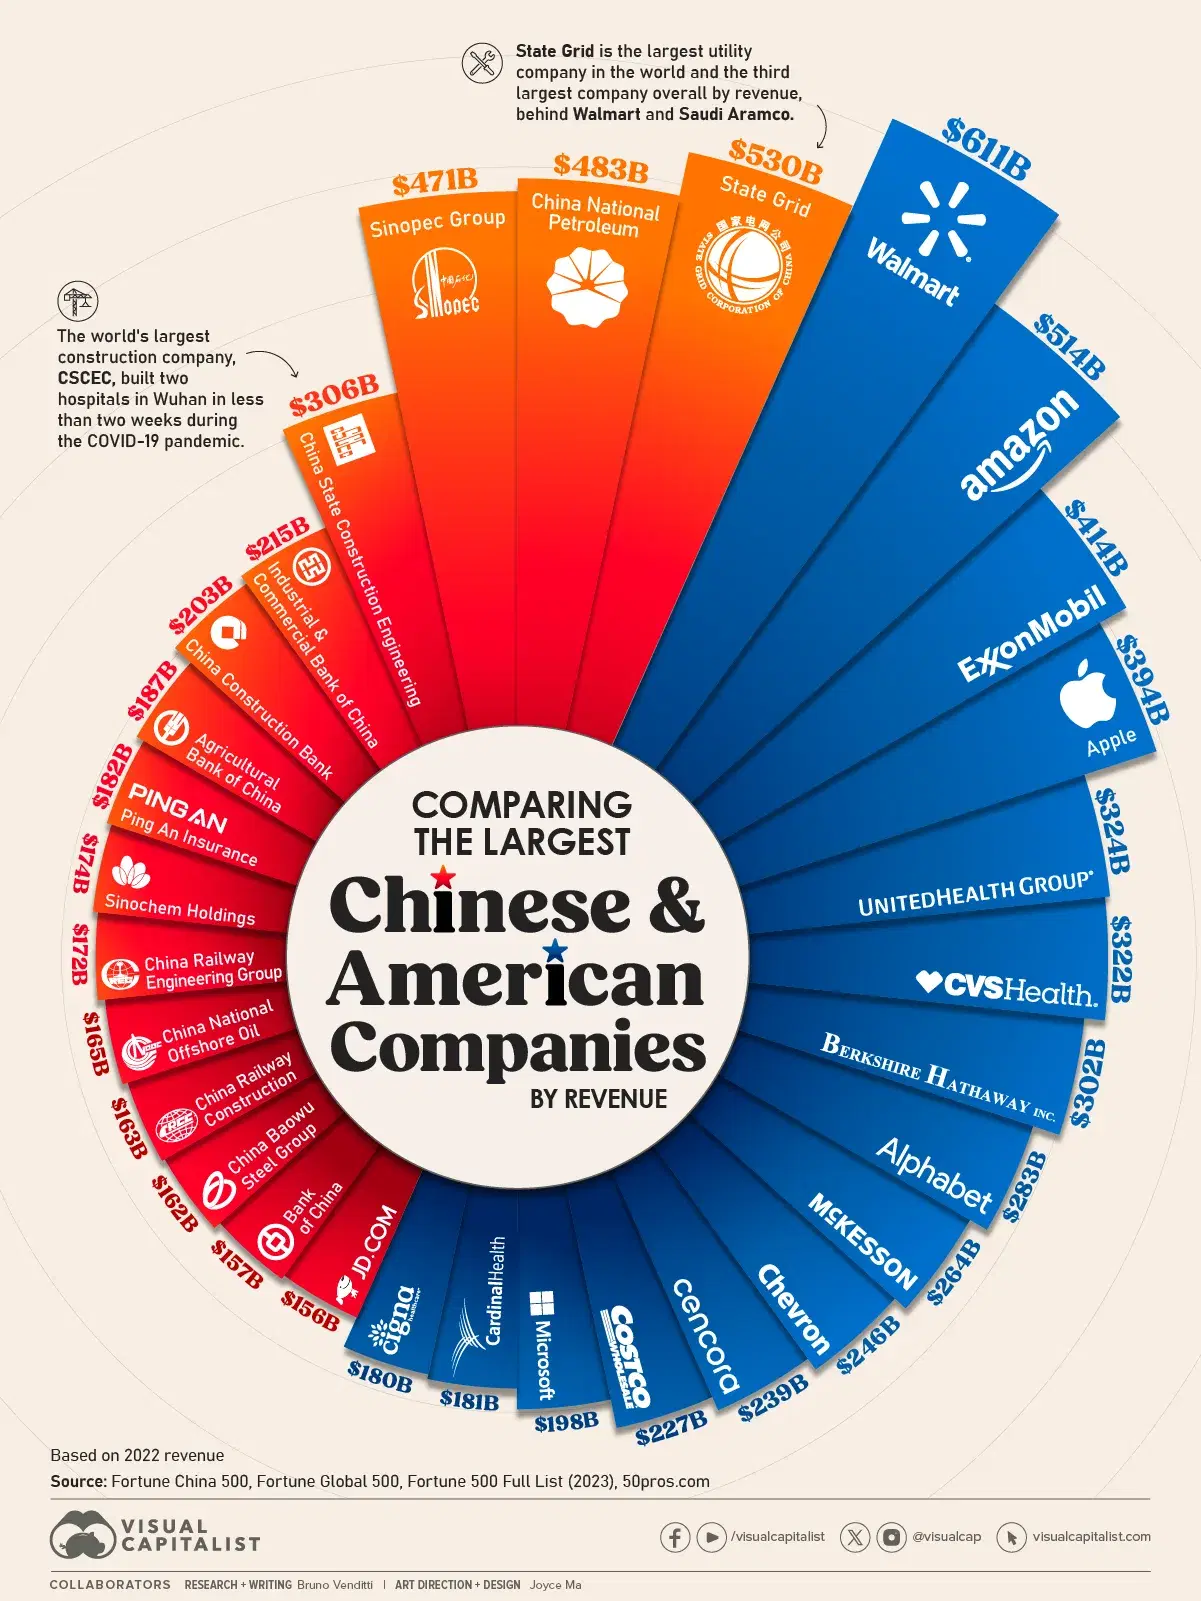 Ranking the Largest Companies by Revenue: USA vs. China